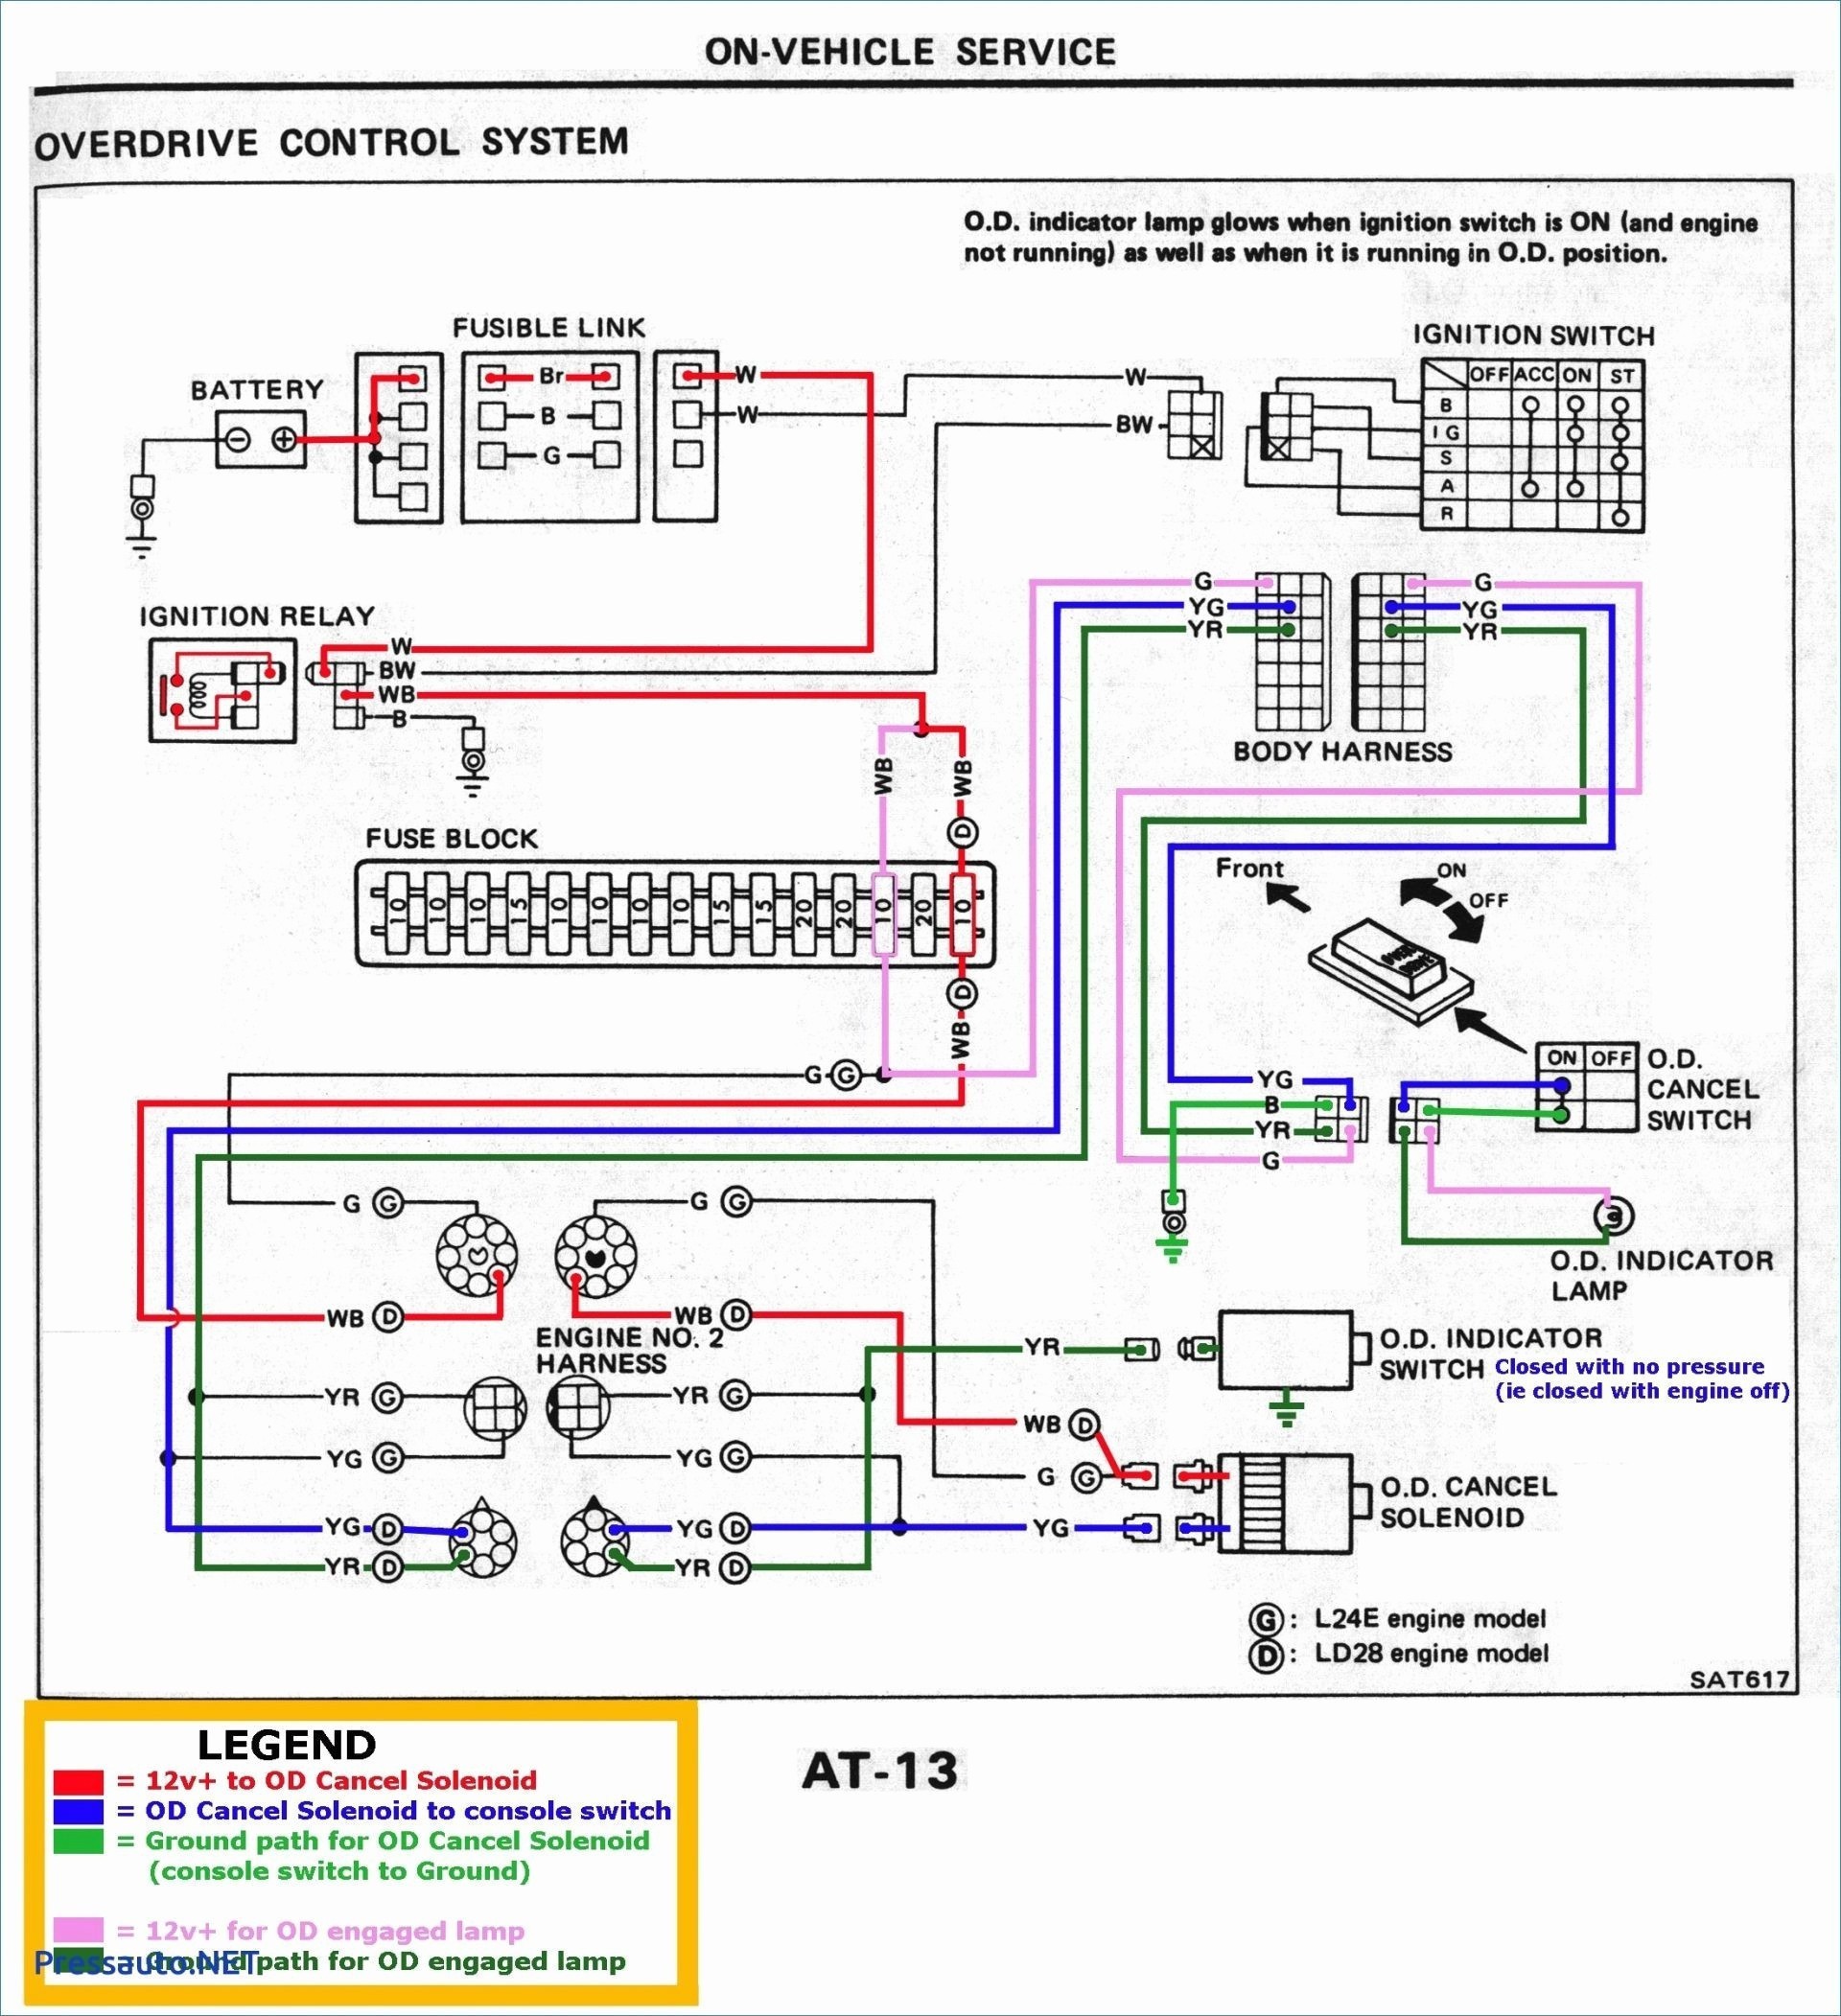 3 Phase Electricity Meter Wiring Diagram Book Wiring Diagram Electric Meter Best Wiring Diagram Kwh Meter 3 Phase